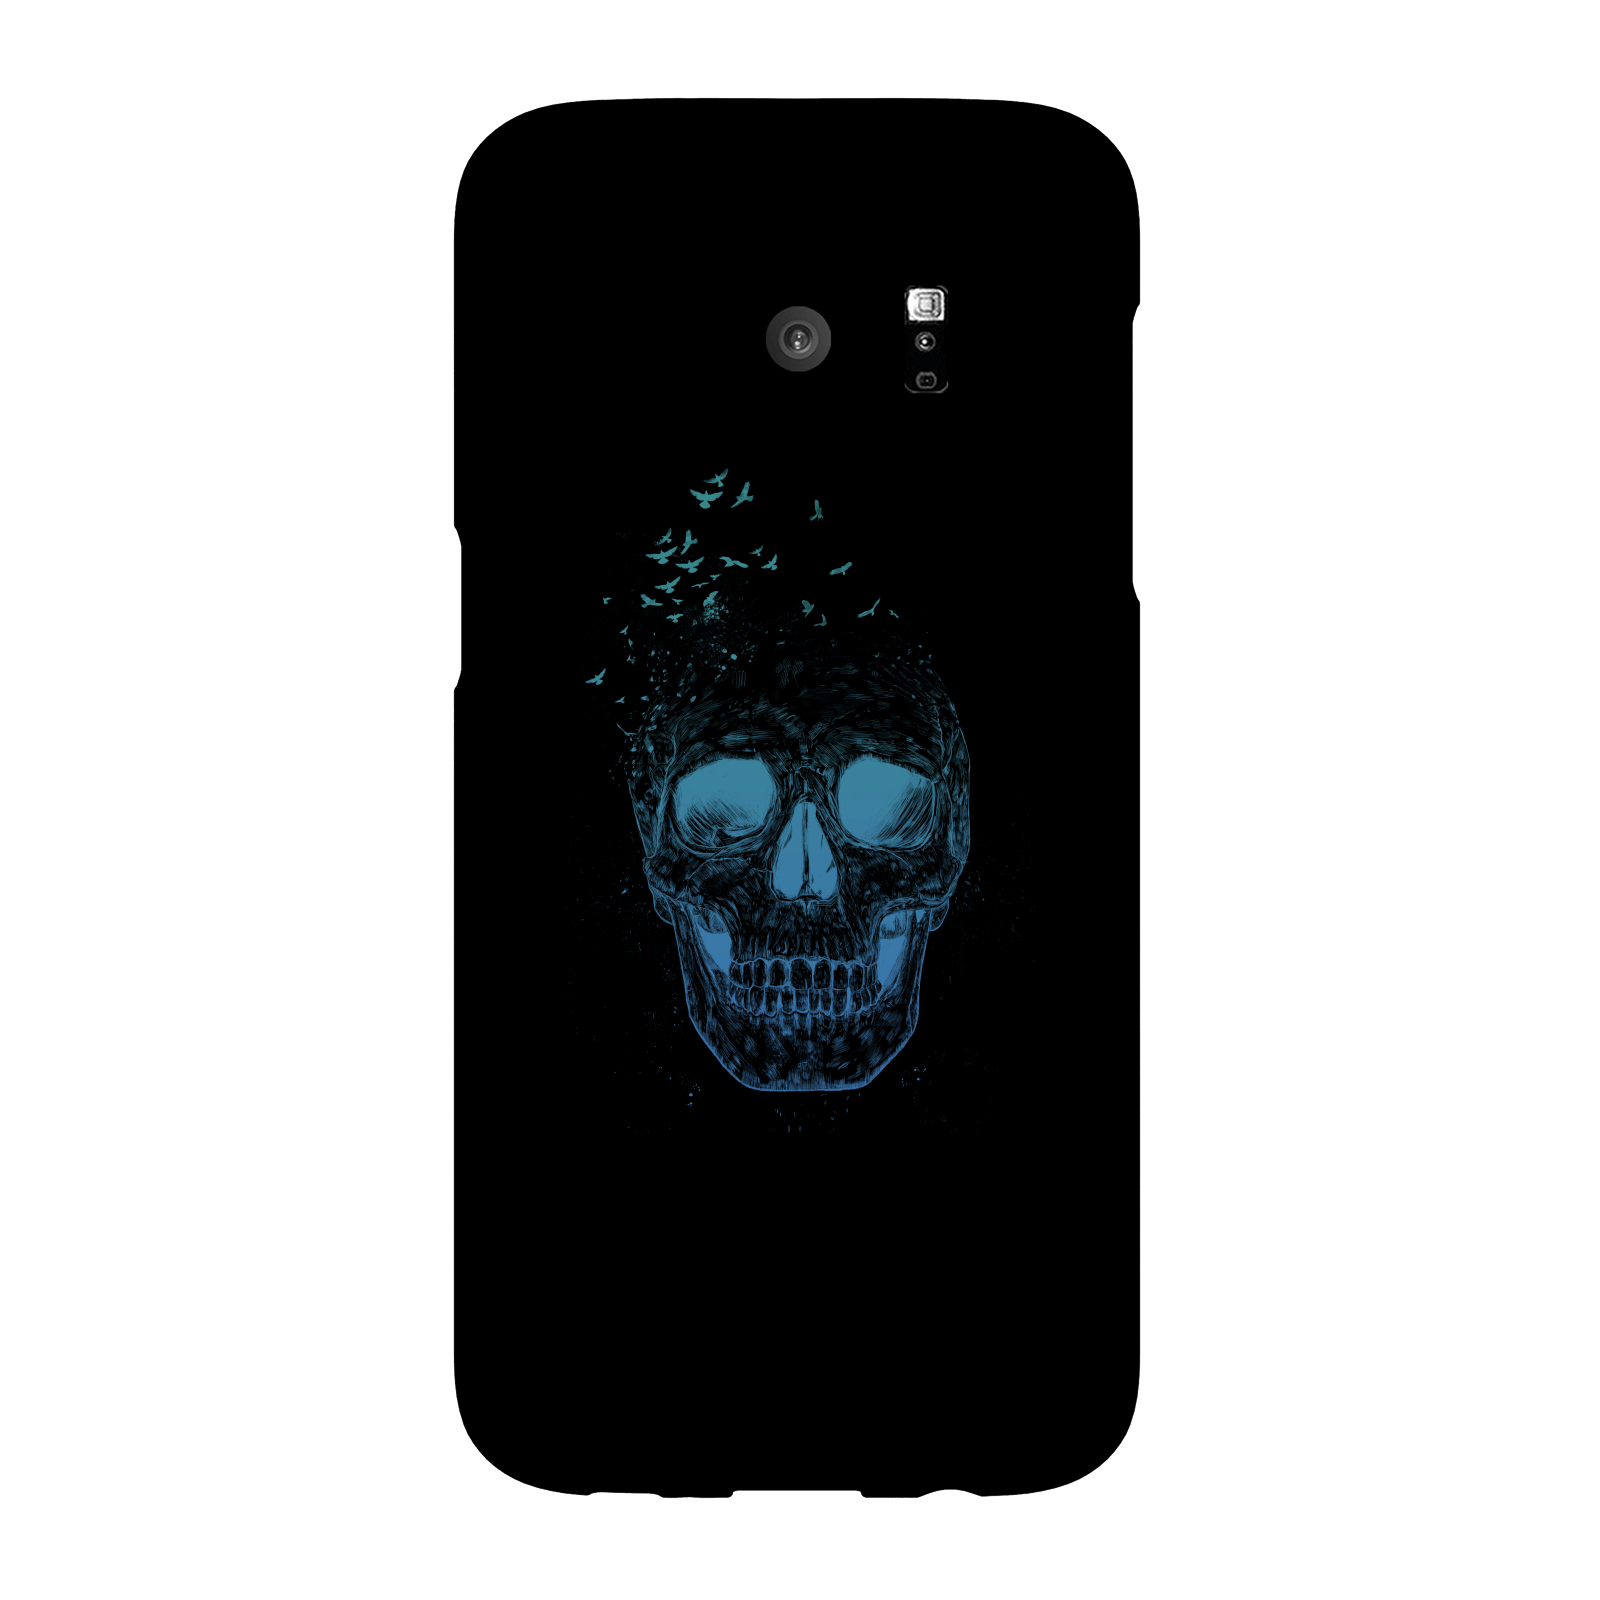 balazs solti lost mind phone case for iphone and android - samsung s7 edge - snap case - gloss